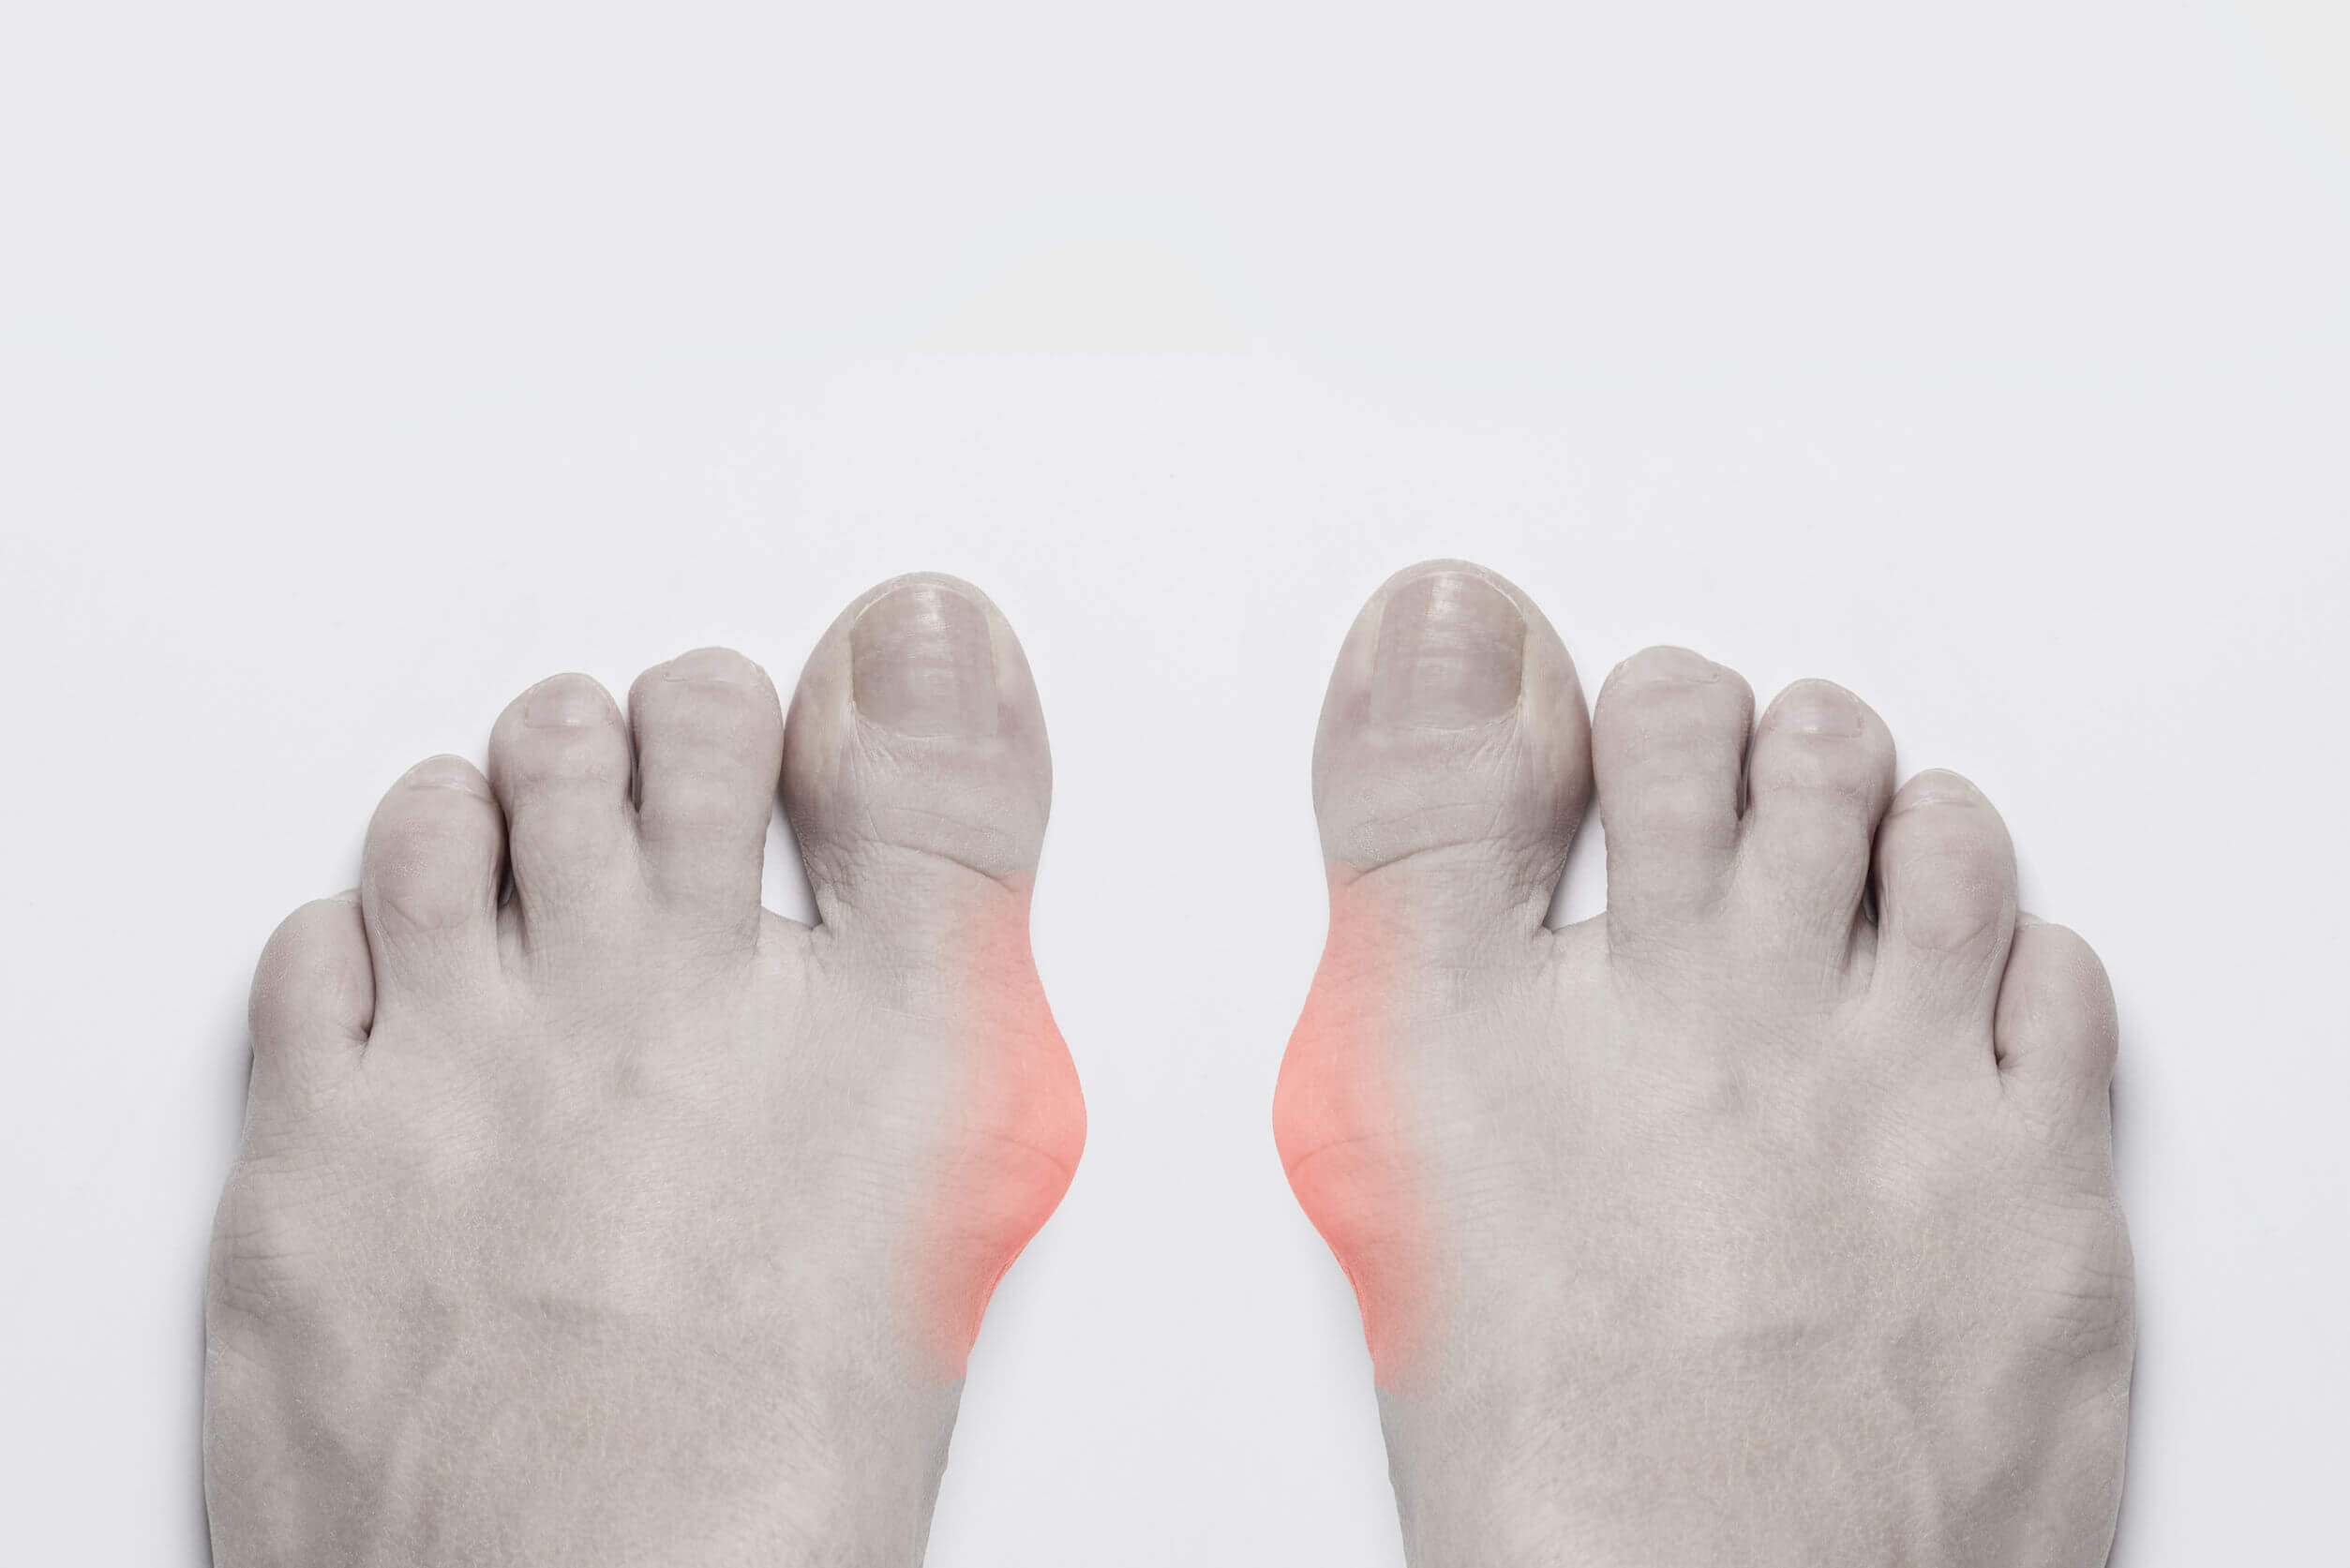 Patients with gout should exercise caution while taking indapamide.